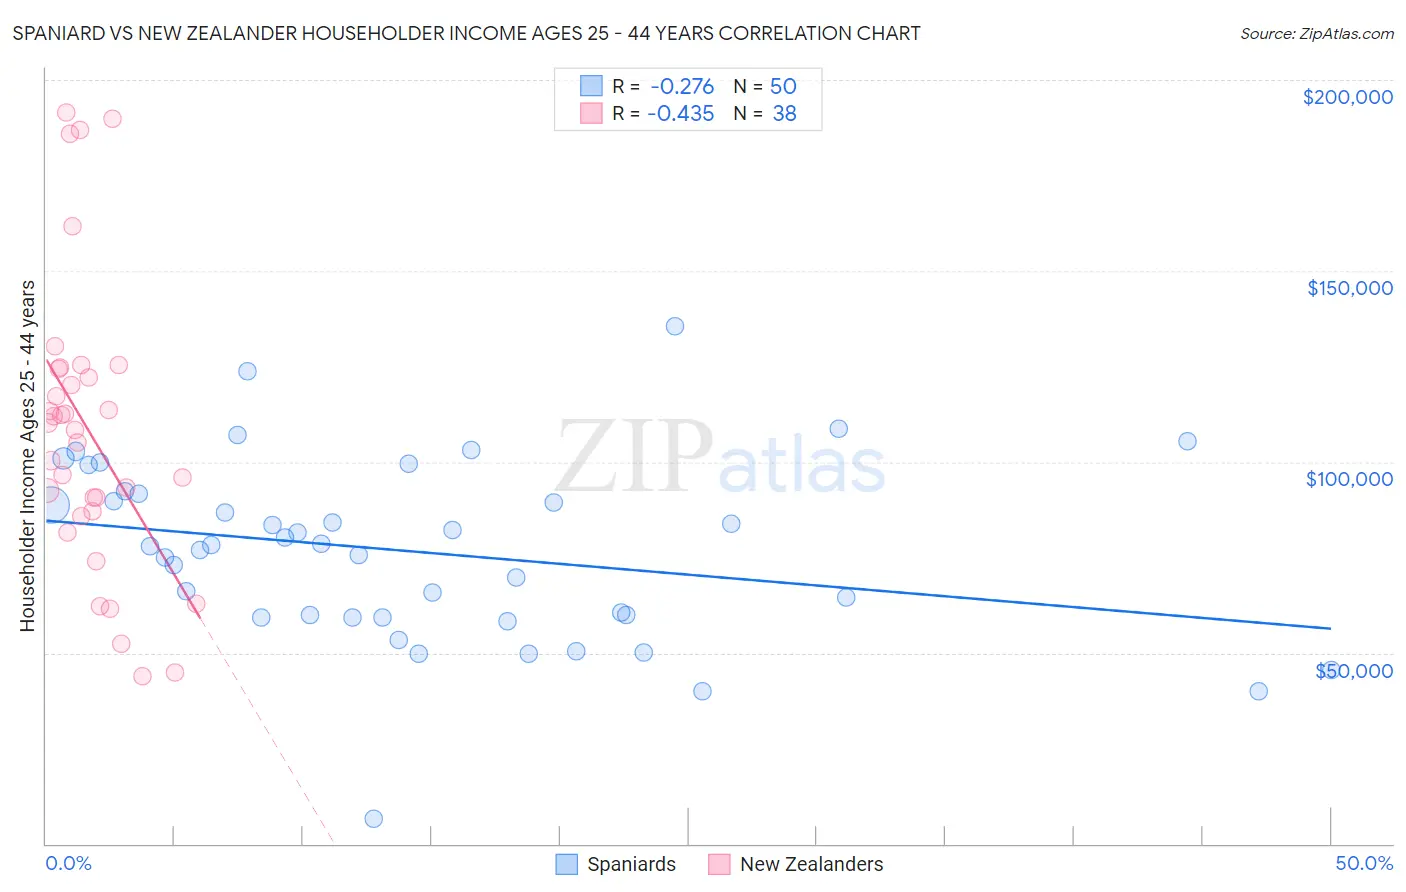 Spaniard vs New Zealander Householder Income Ages 25 - 44 years